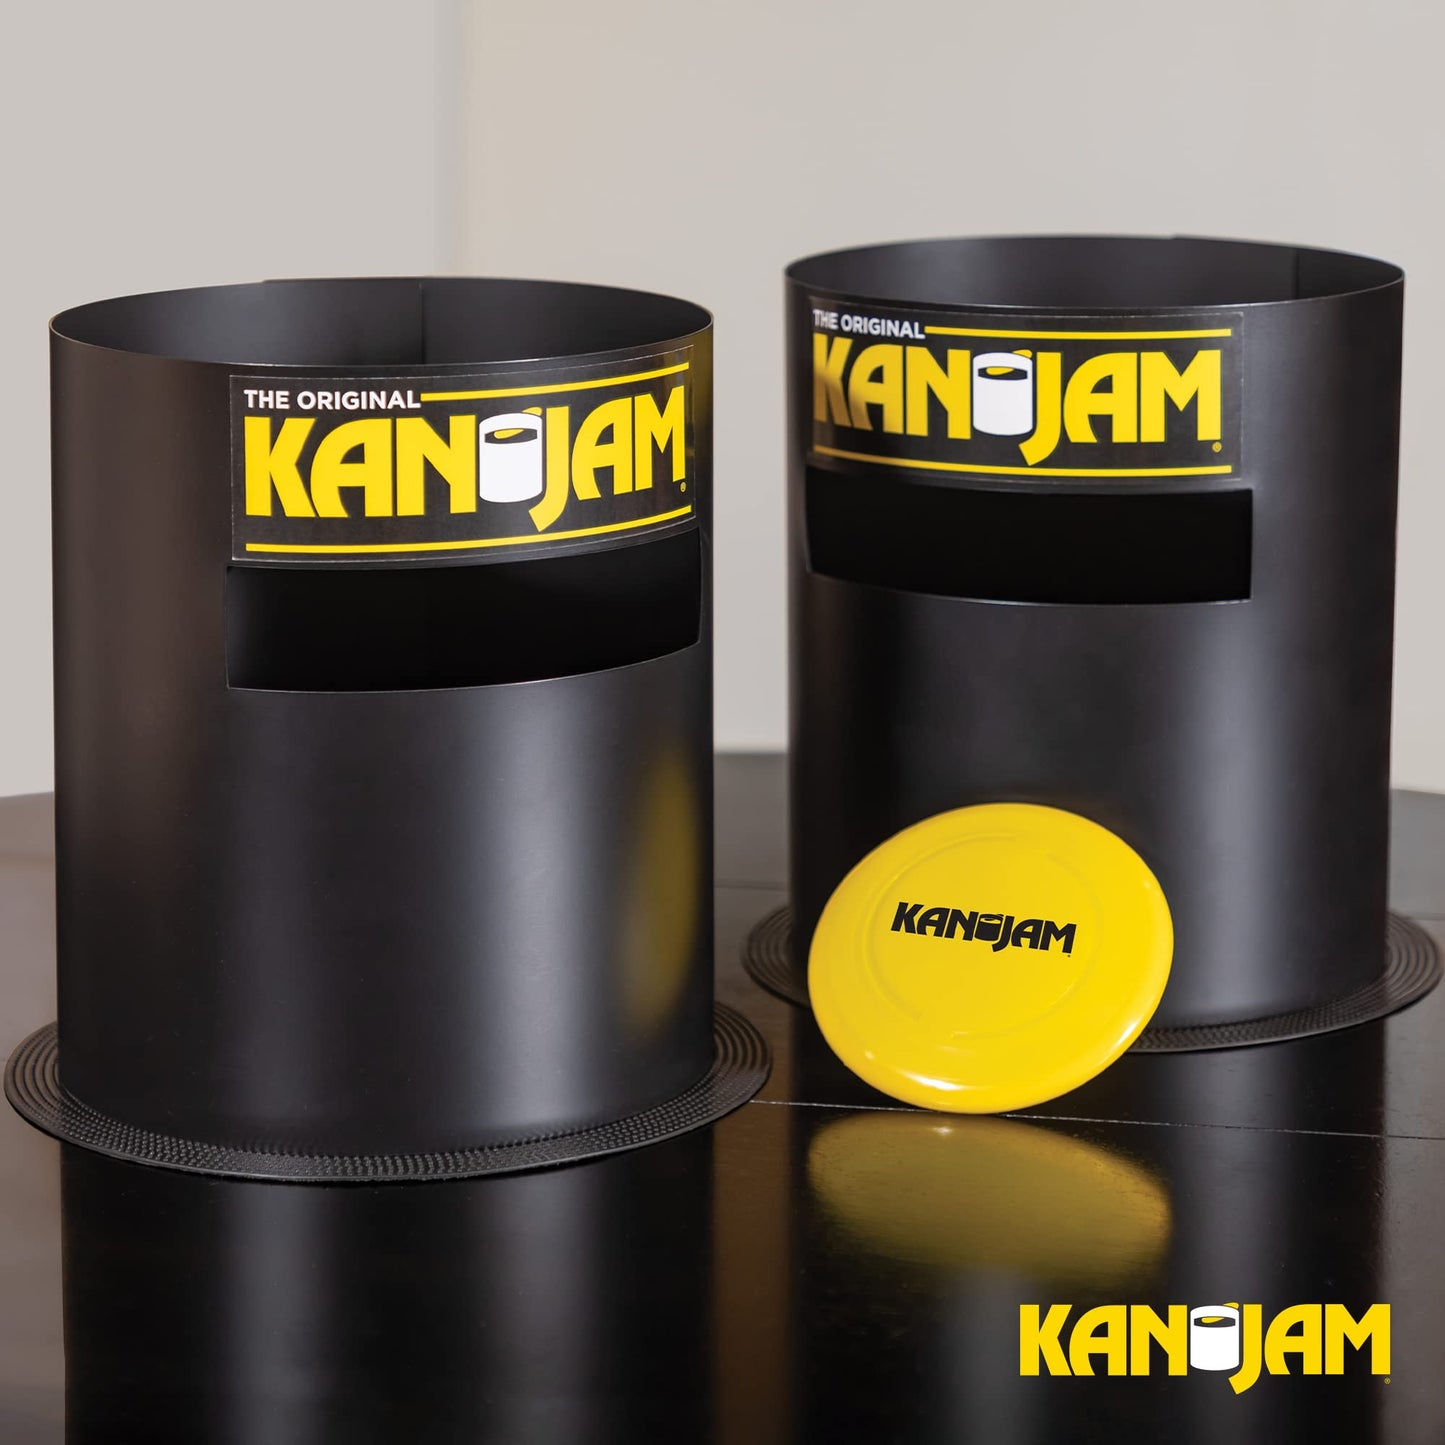 Kan Jam Mini - The Original Backyard Outdoor Game now in a Smaller Indoor Size - Complete with 2 Targets and 1 Mini Disc